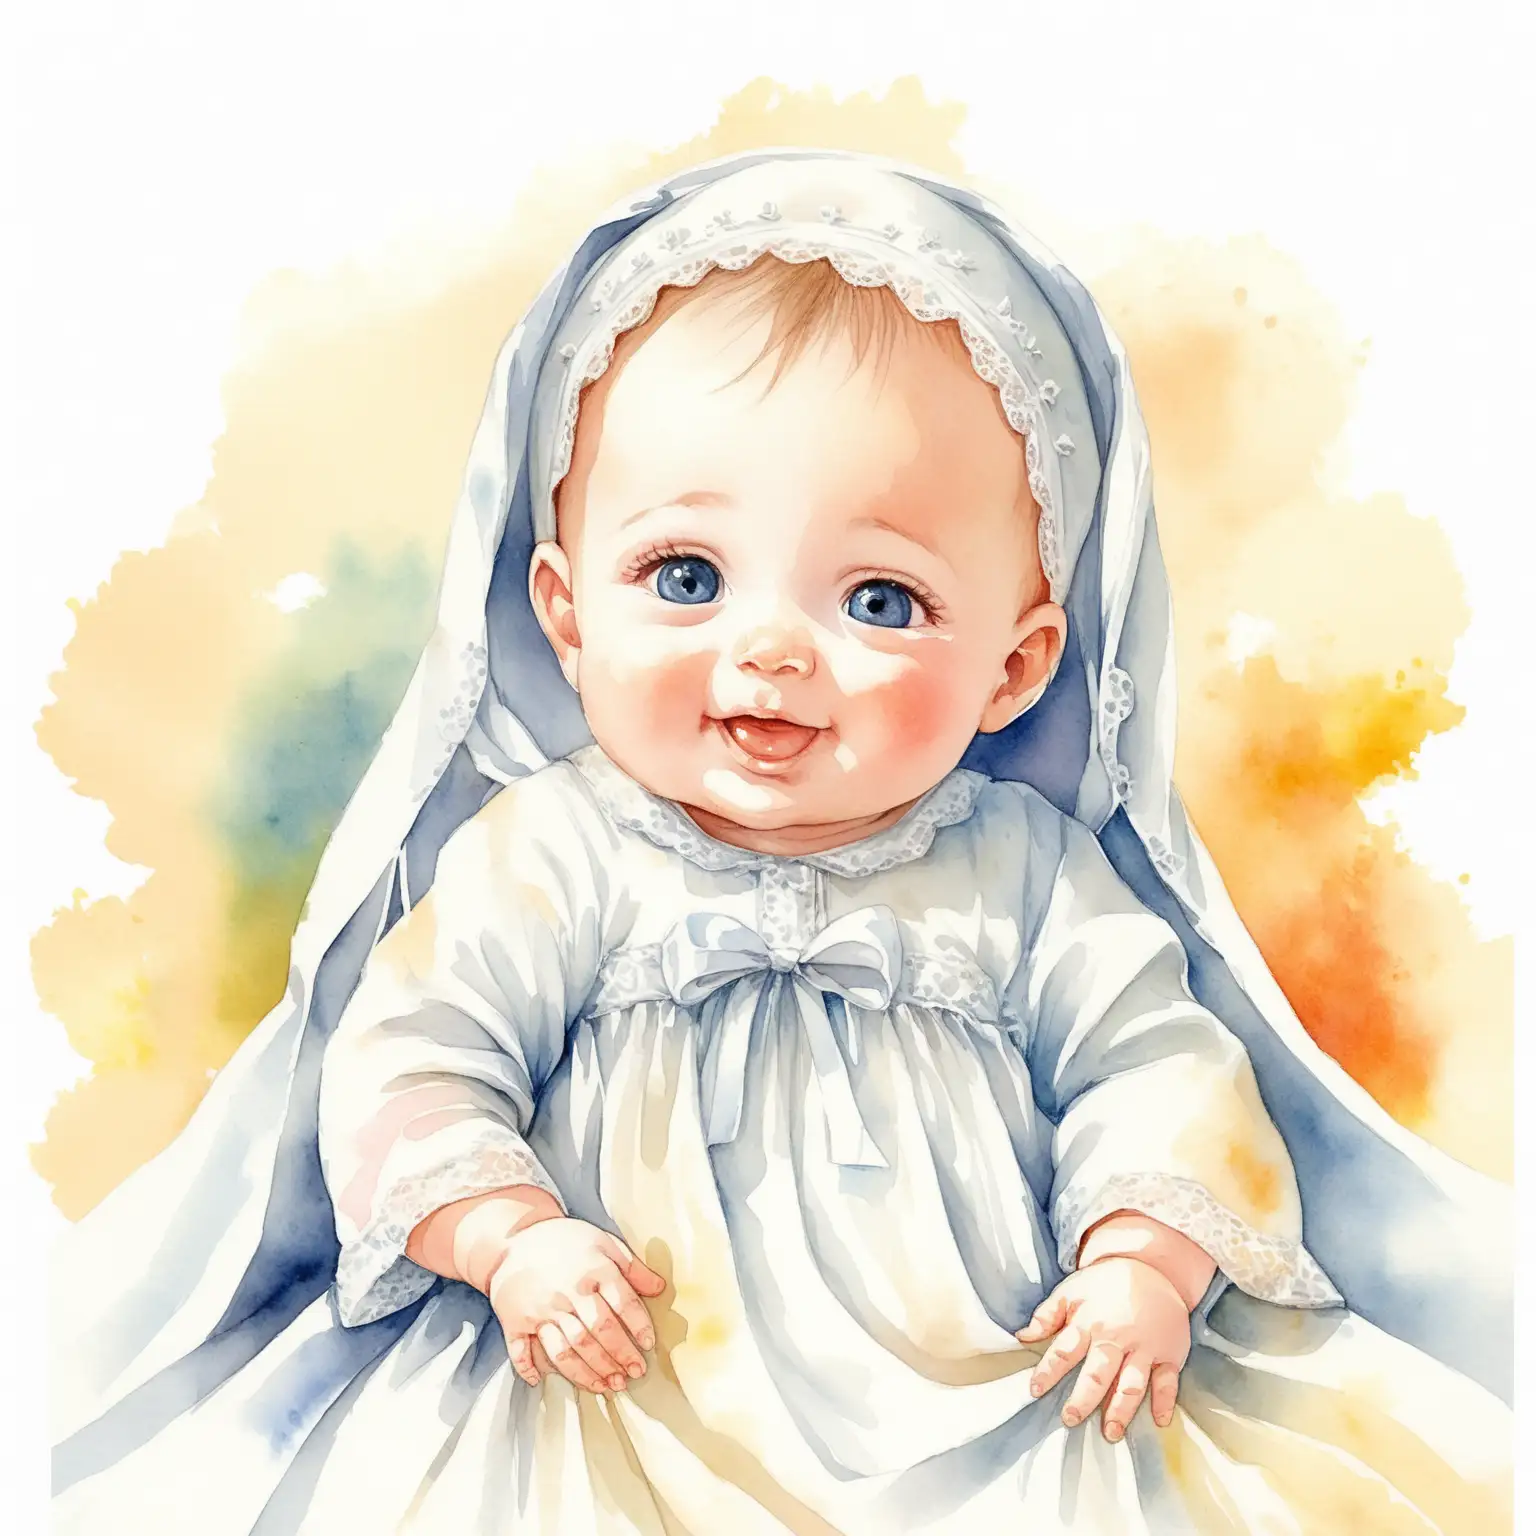 Joyful Baby in Christening Gown on Soft Watercolor Background